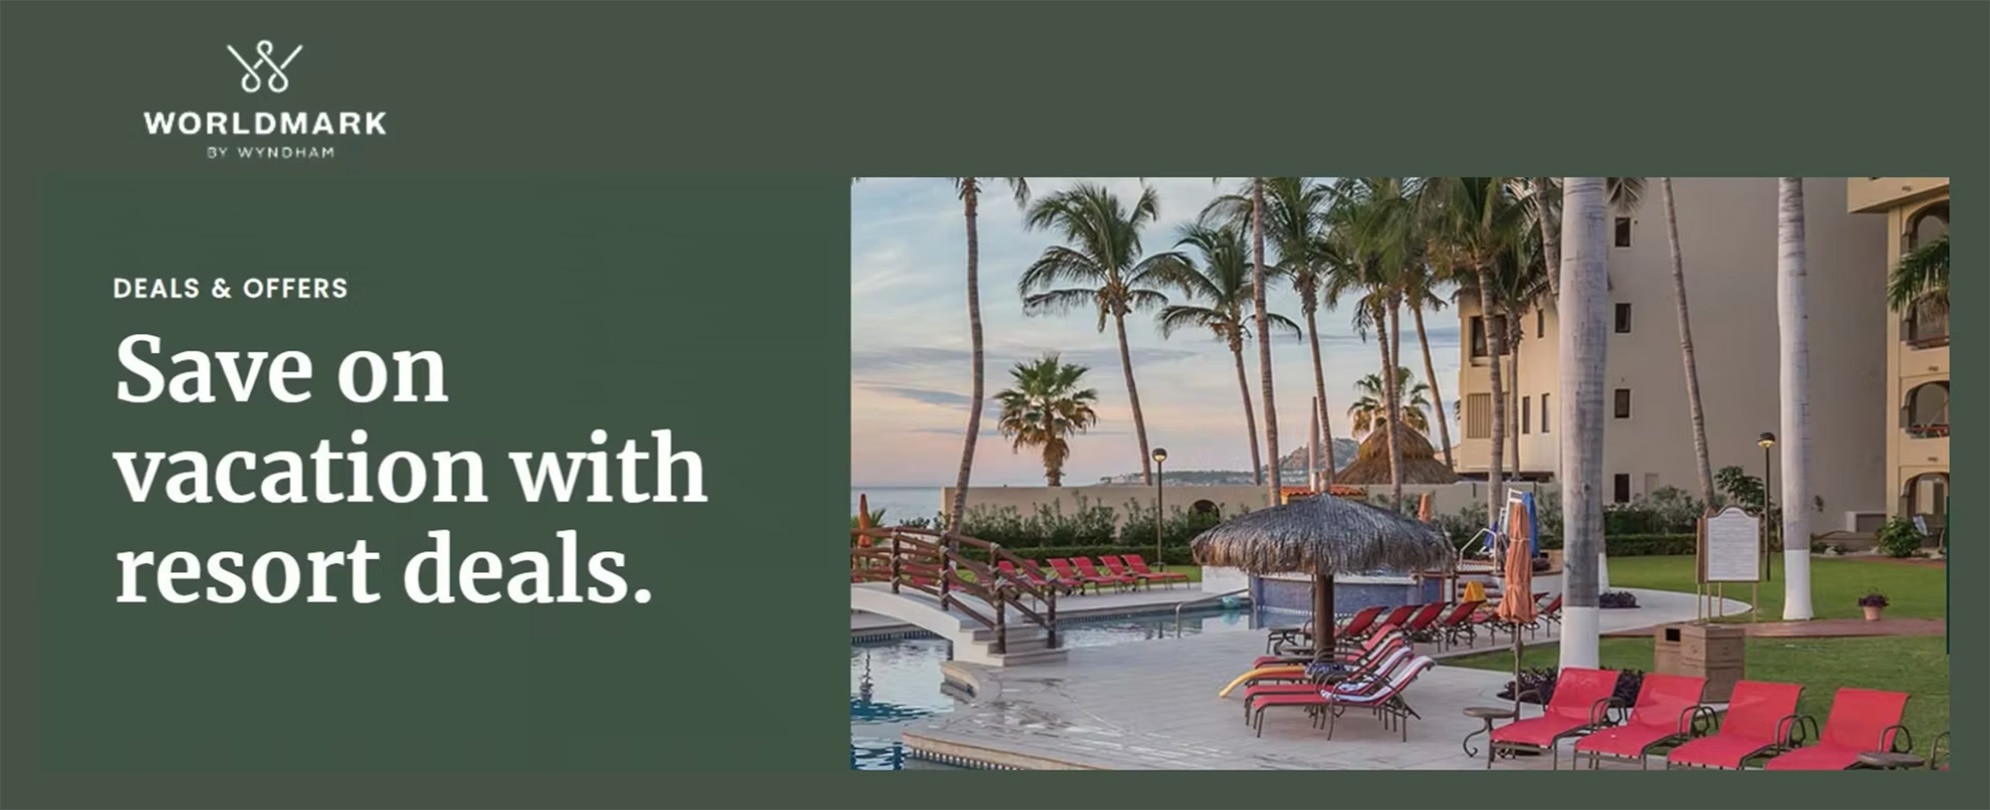 Palm trees around a pool with straw huts overlooking water with Worldmark by Wyndham.